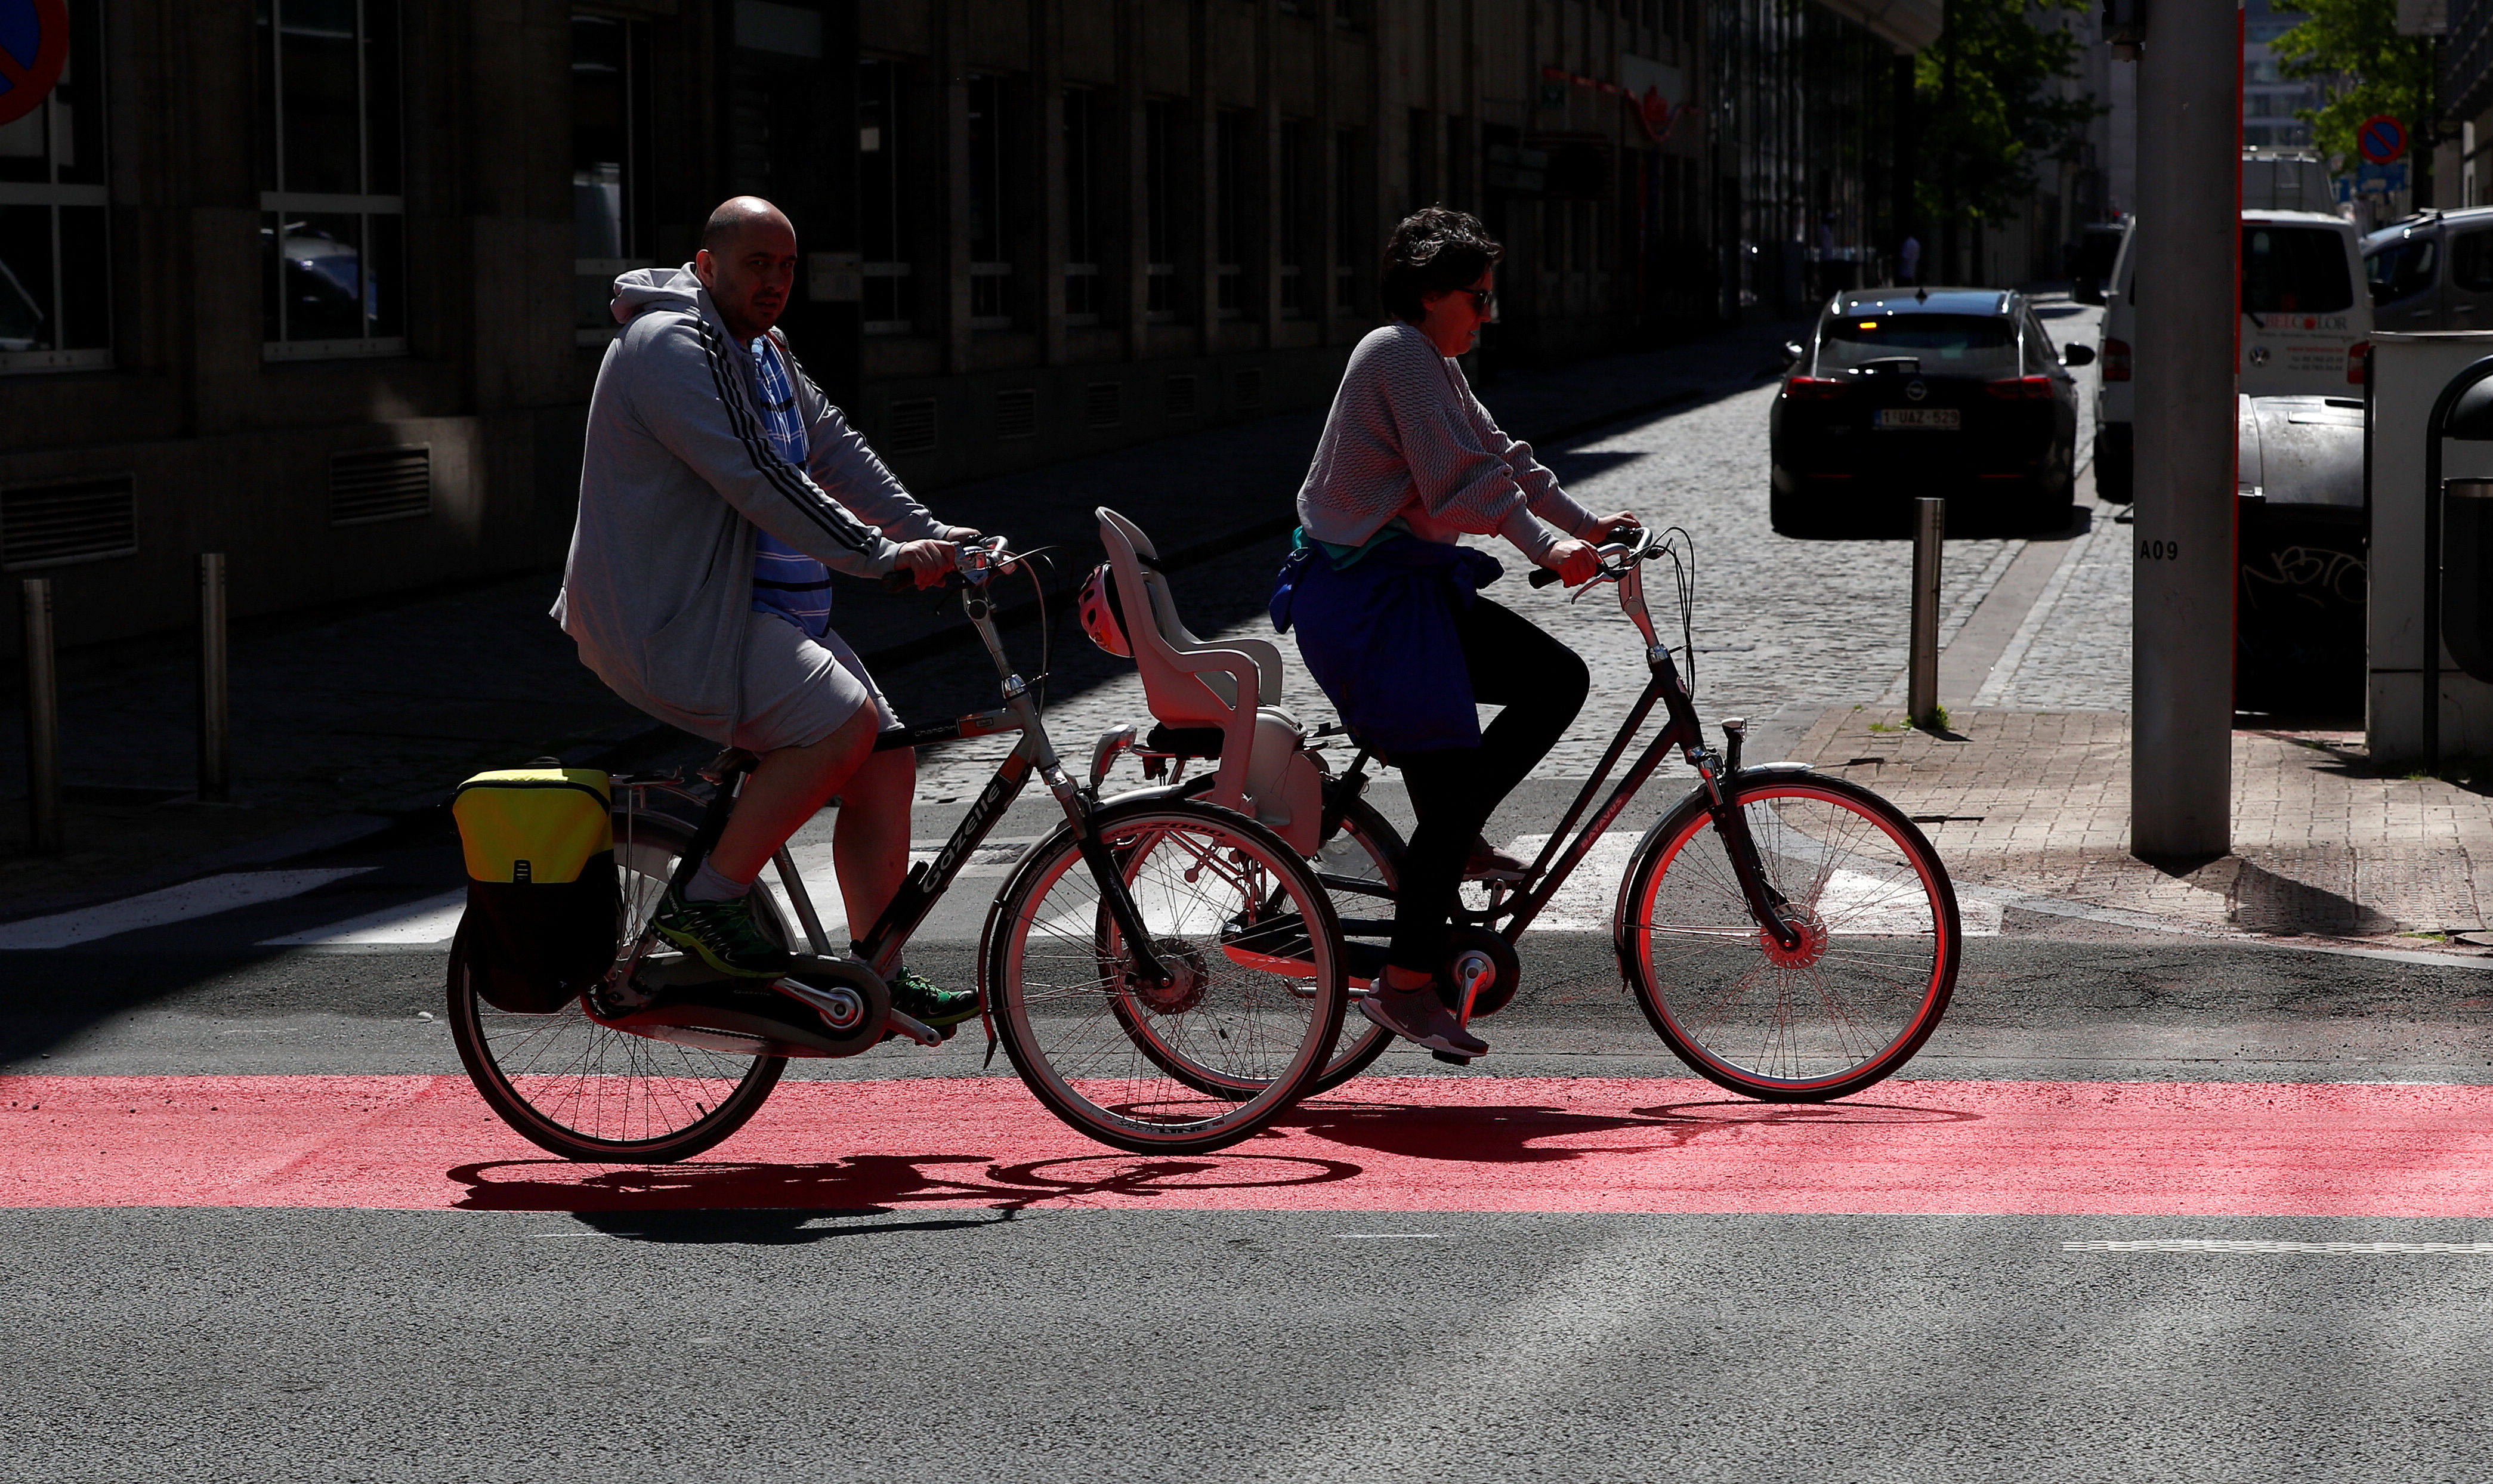 FILE PHOTO: People ride bicycles on a new cycling lane in central Brussel, amid the coronavirus disease outbreak in Brussels, Belgium.